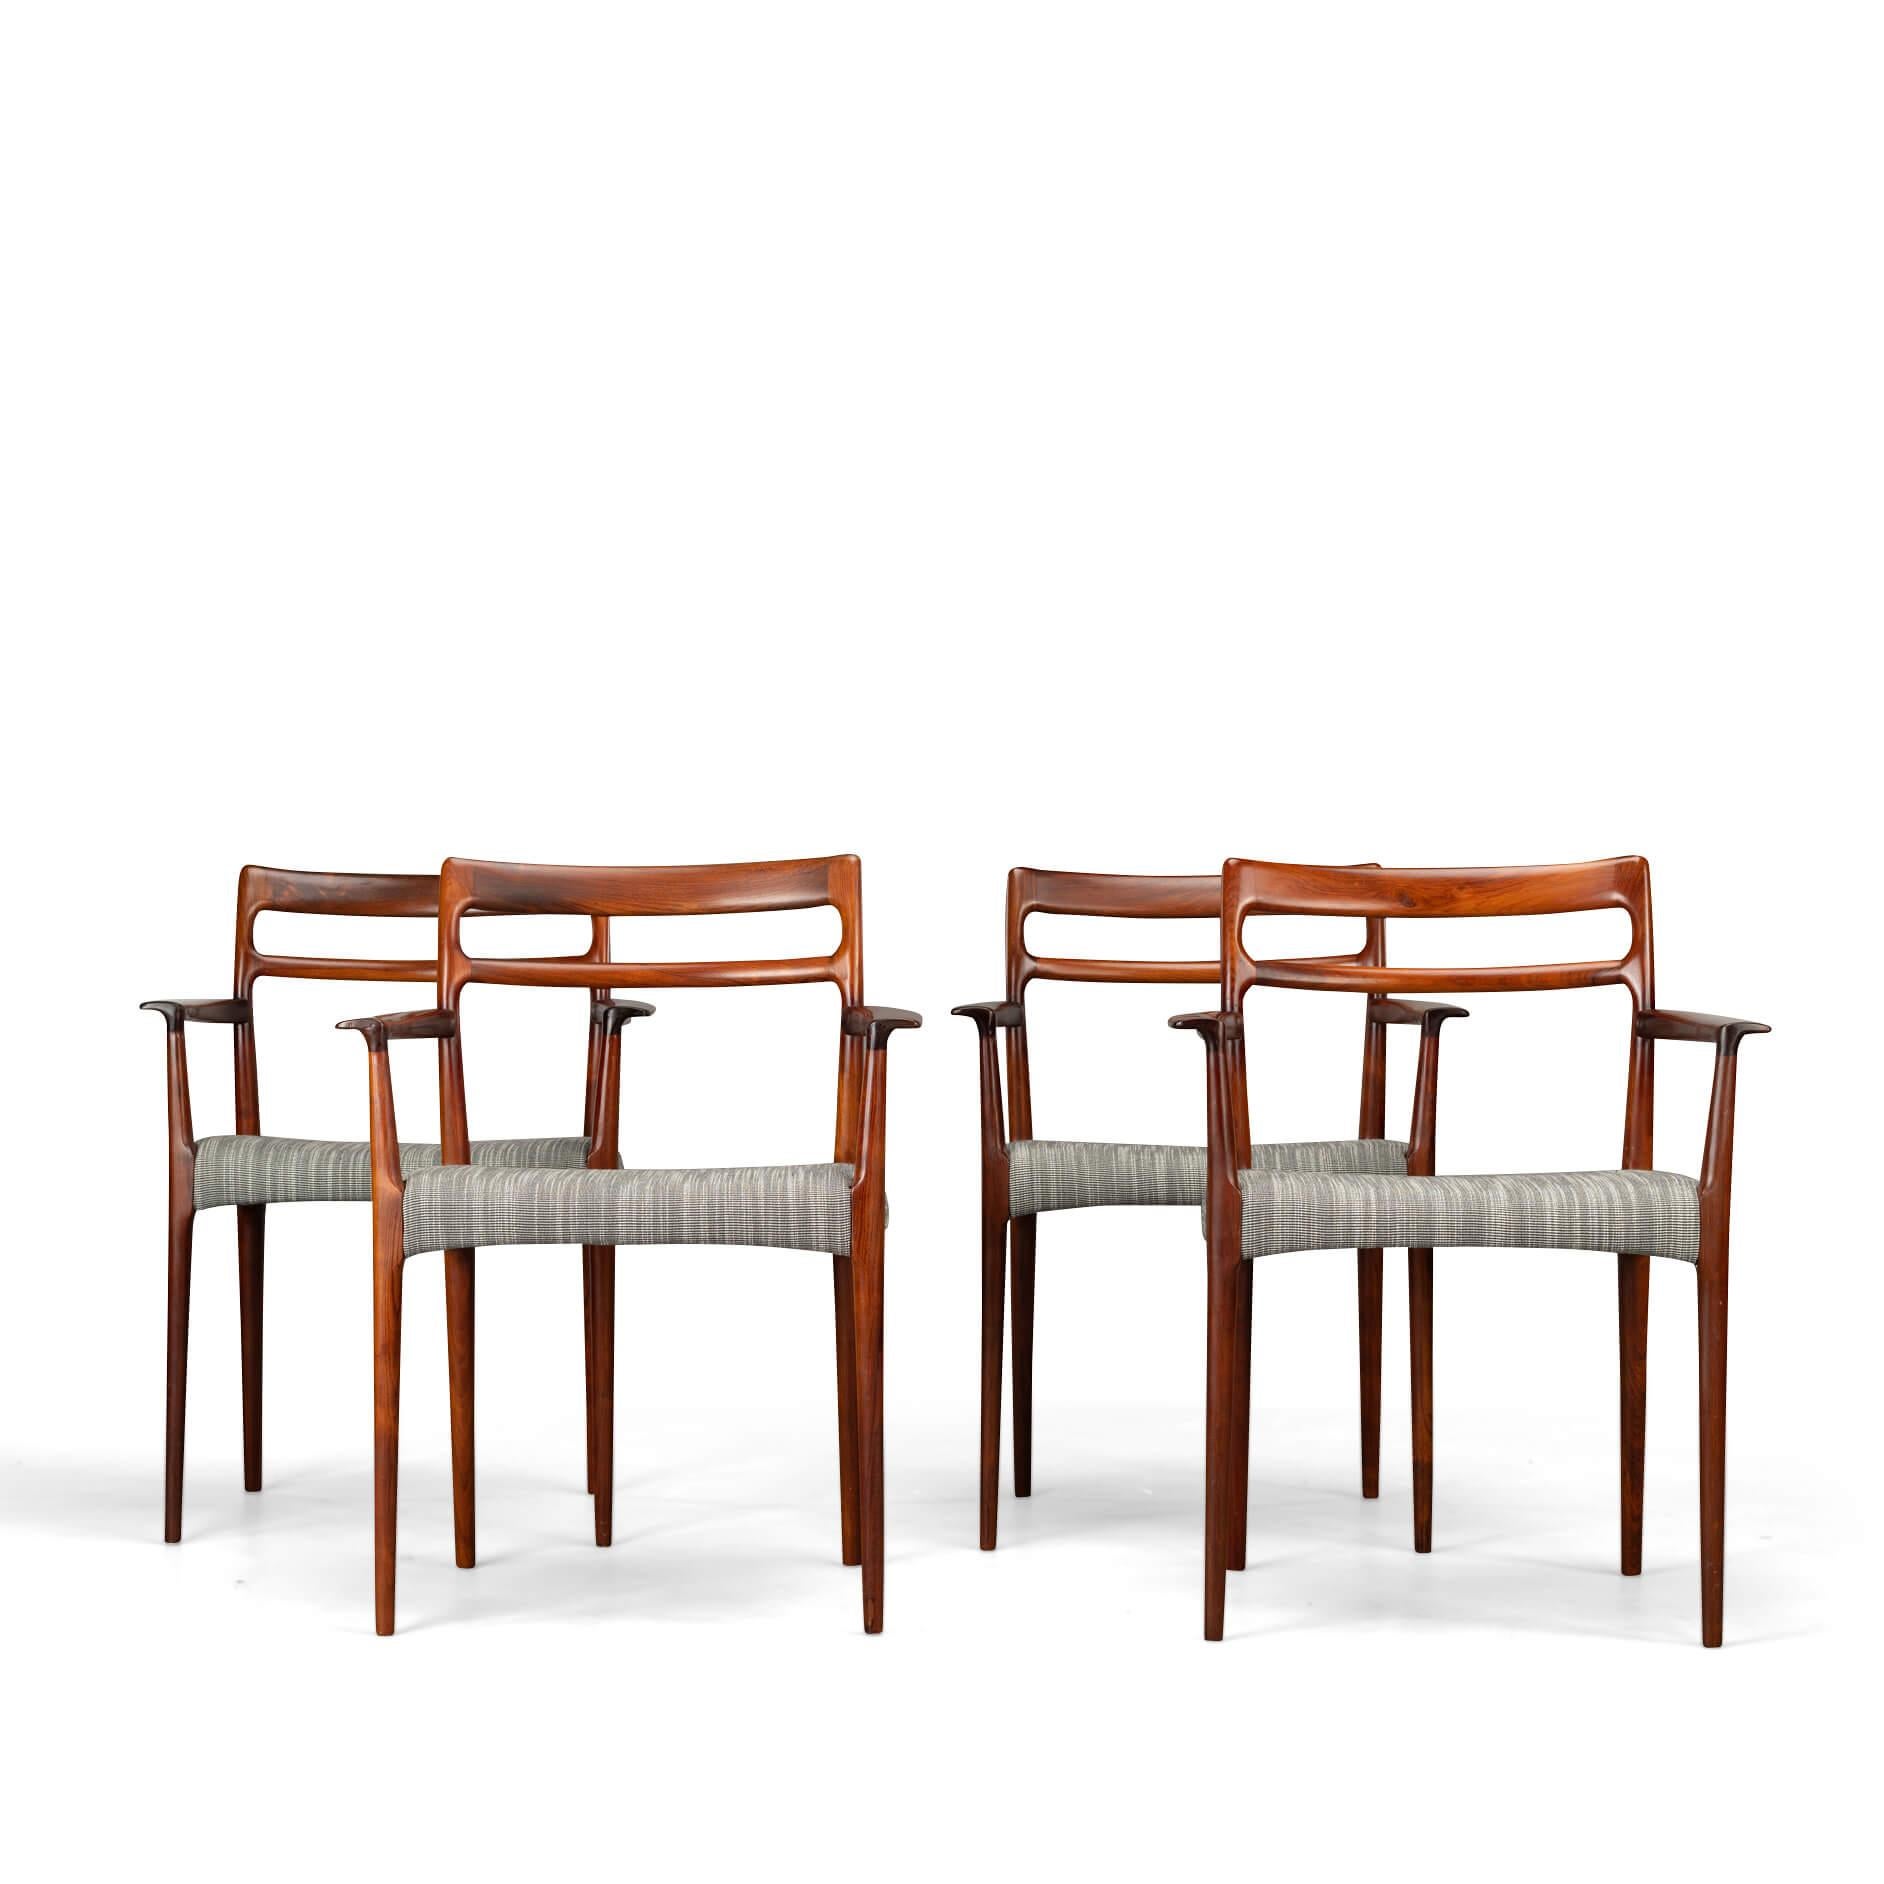 Dining armchair by Erling torvits
A set of four armchairs made by Erling Torvits for Soro Stolefabrik in beautiful rosewood. All chairs are marked with the Soro Stolefabrik stamp on the underside of the seat. We have had these beautiful chairs